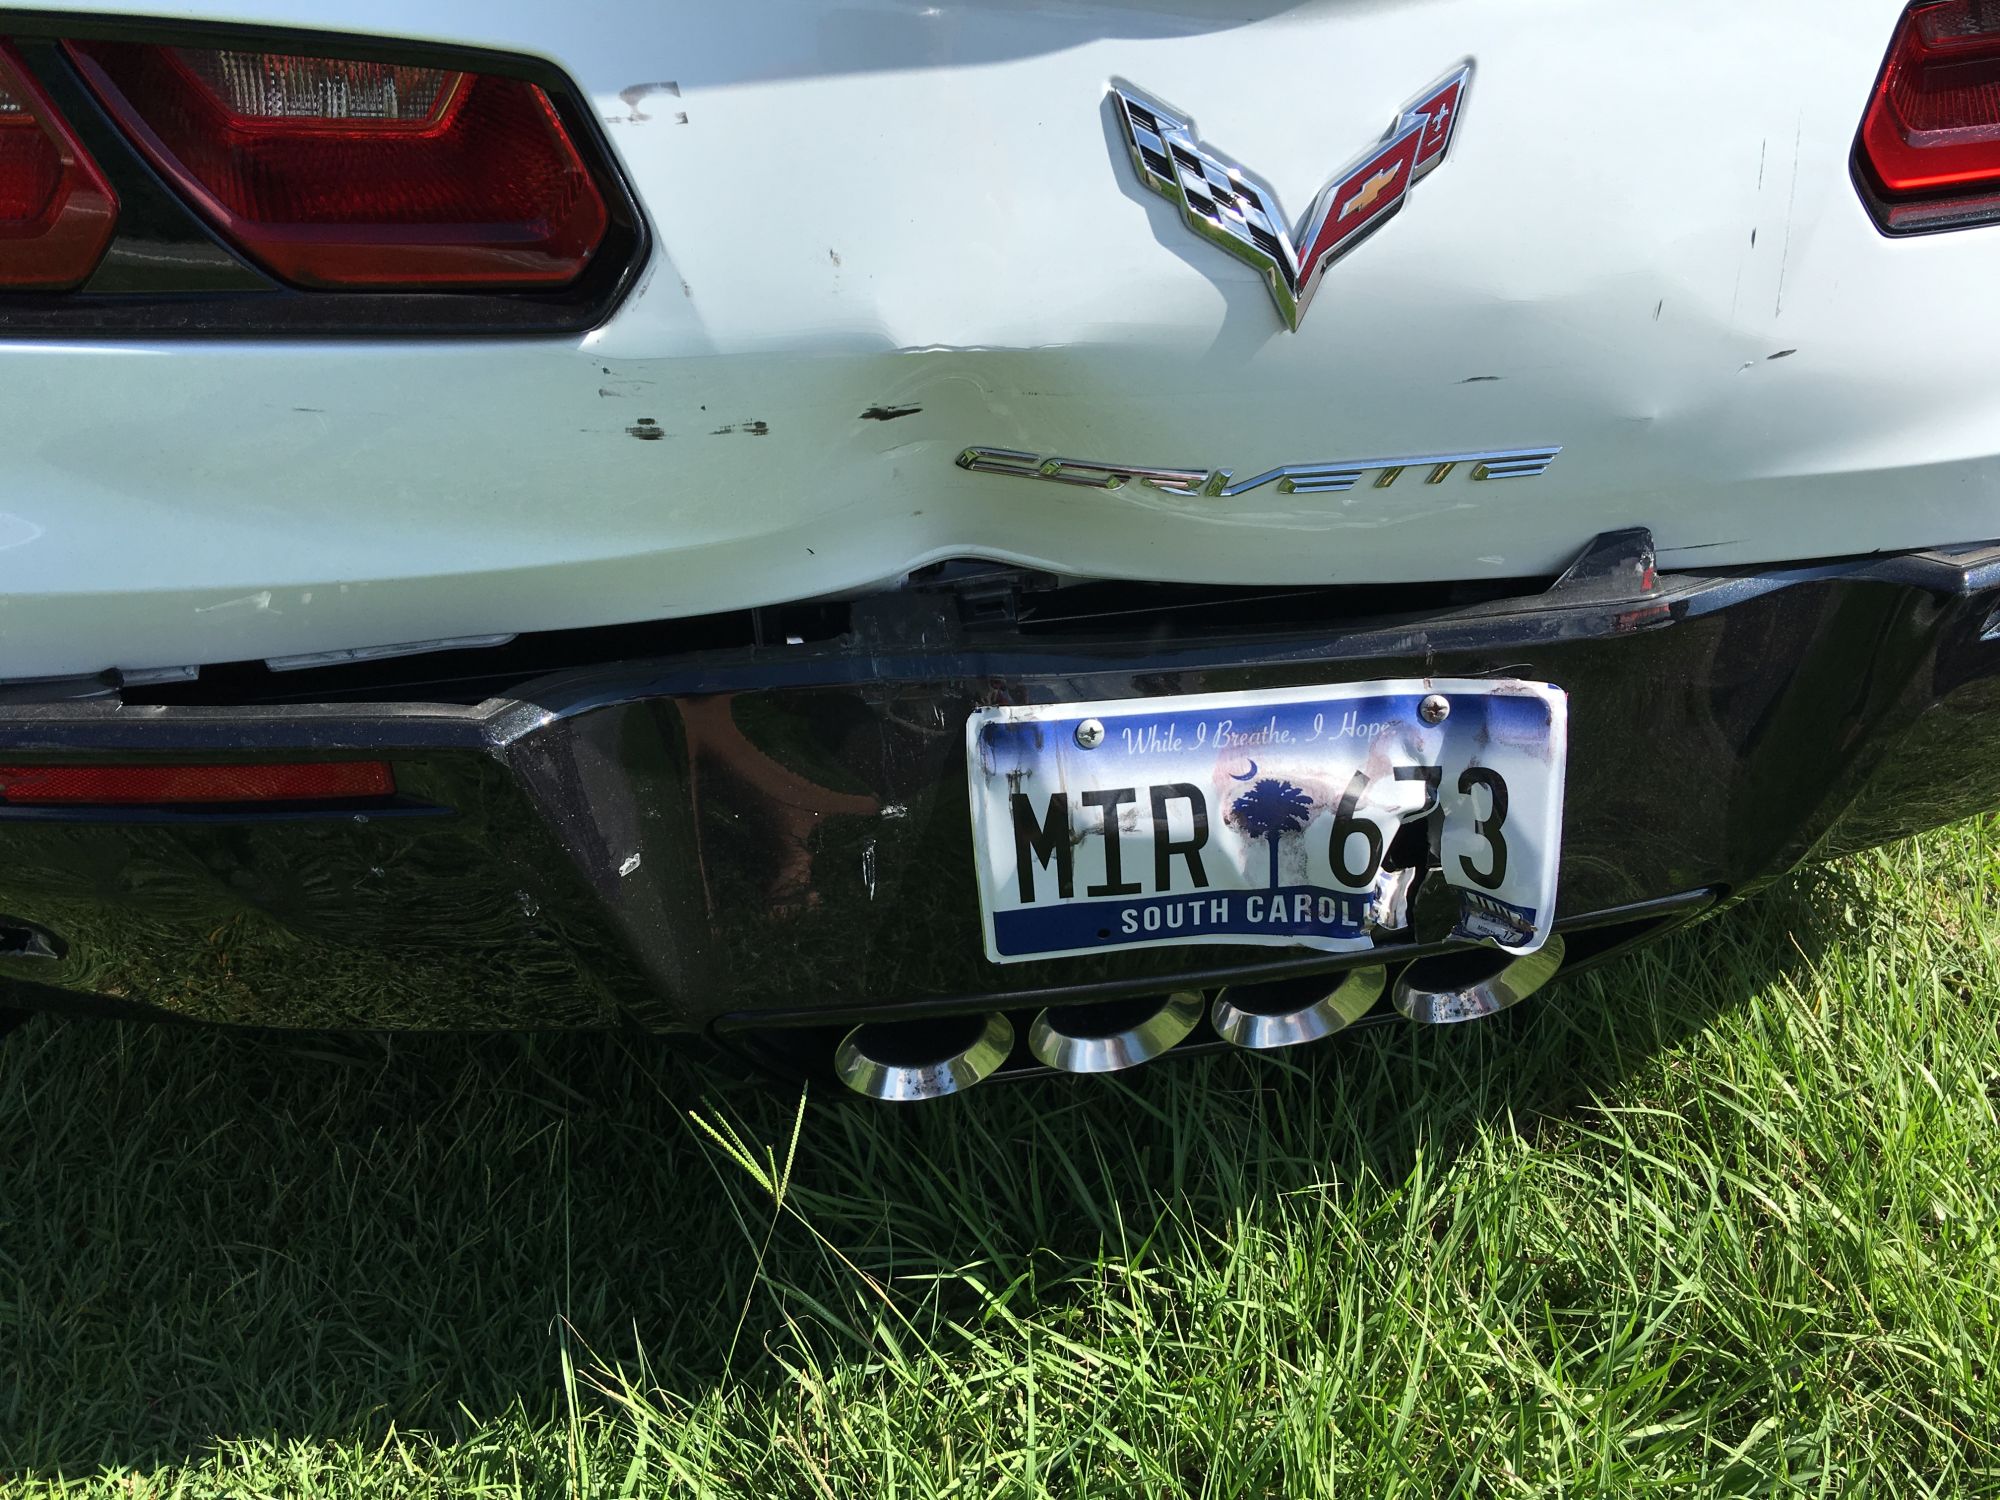 Distracted Driving Leads to New Corvette Getting Whacked